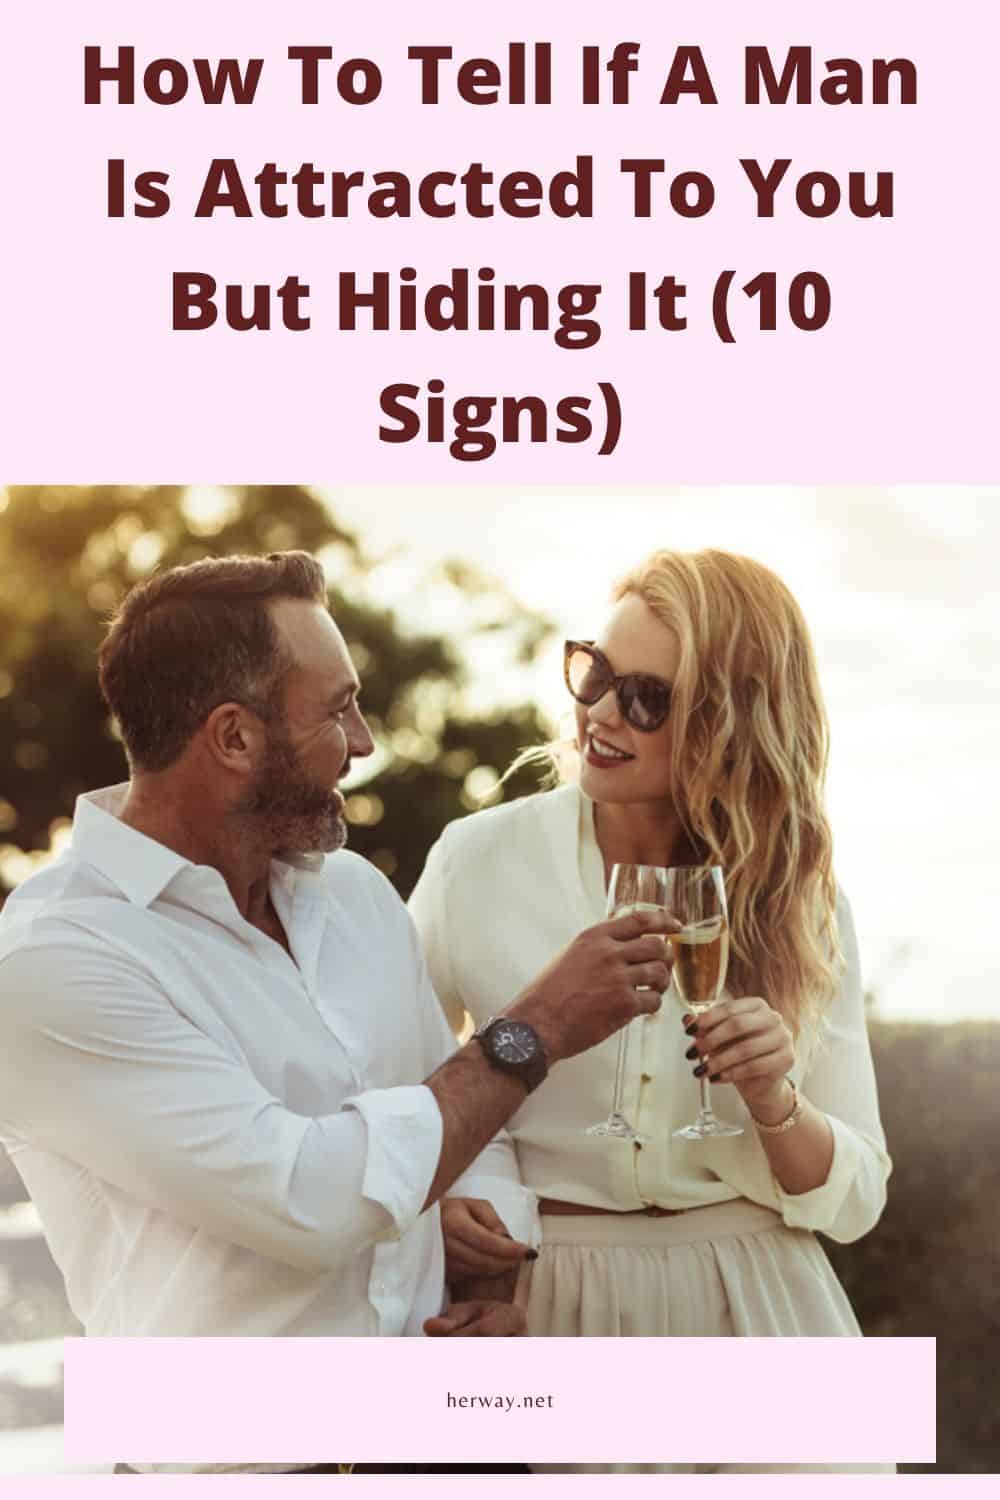 How To Tell If A Man Is Attracted To You But Hiding It 10 Signs